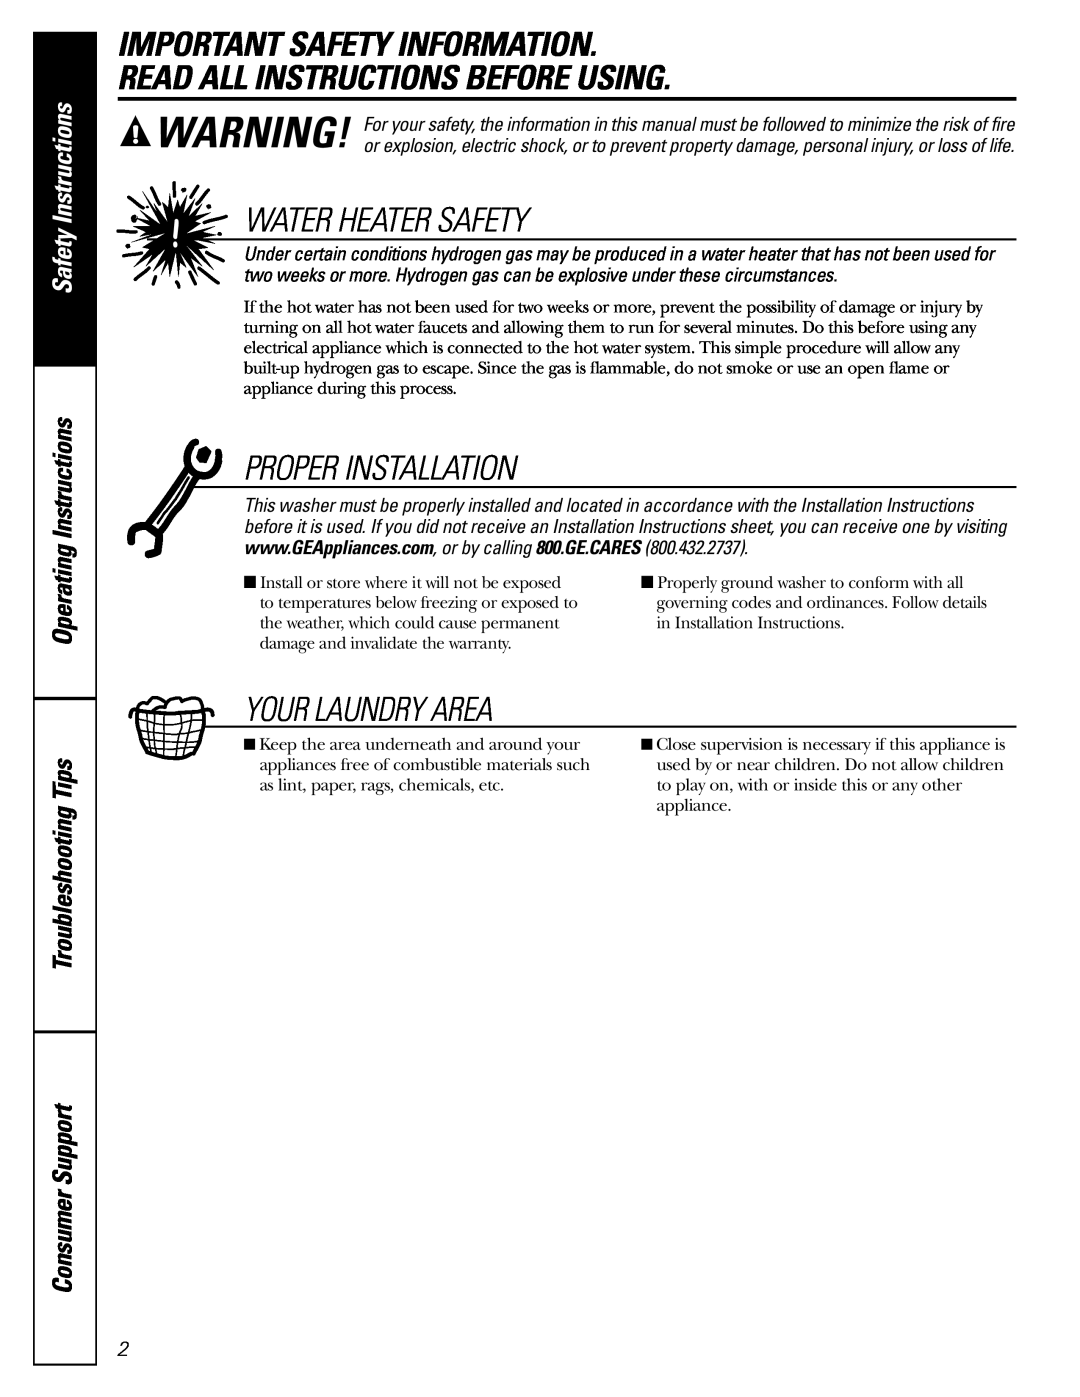 GE WHDSR315 Important Safety Information, Read All Instructions Before Using, Water Heater Safety, Proper Installation 